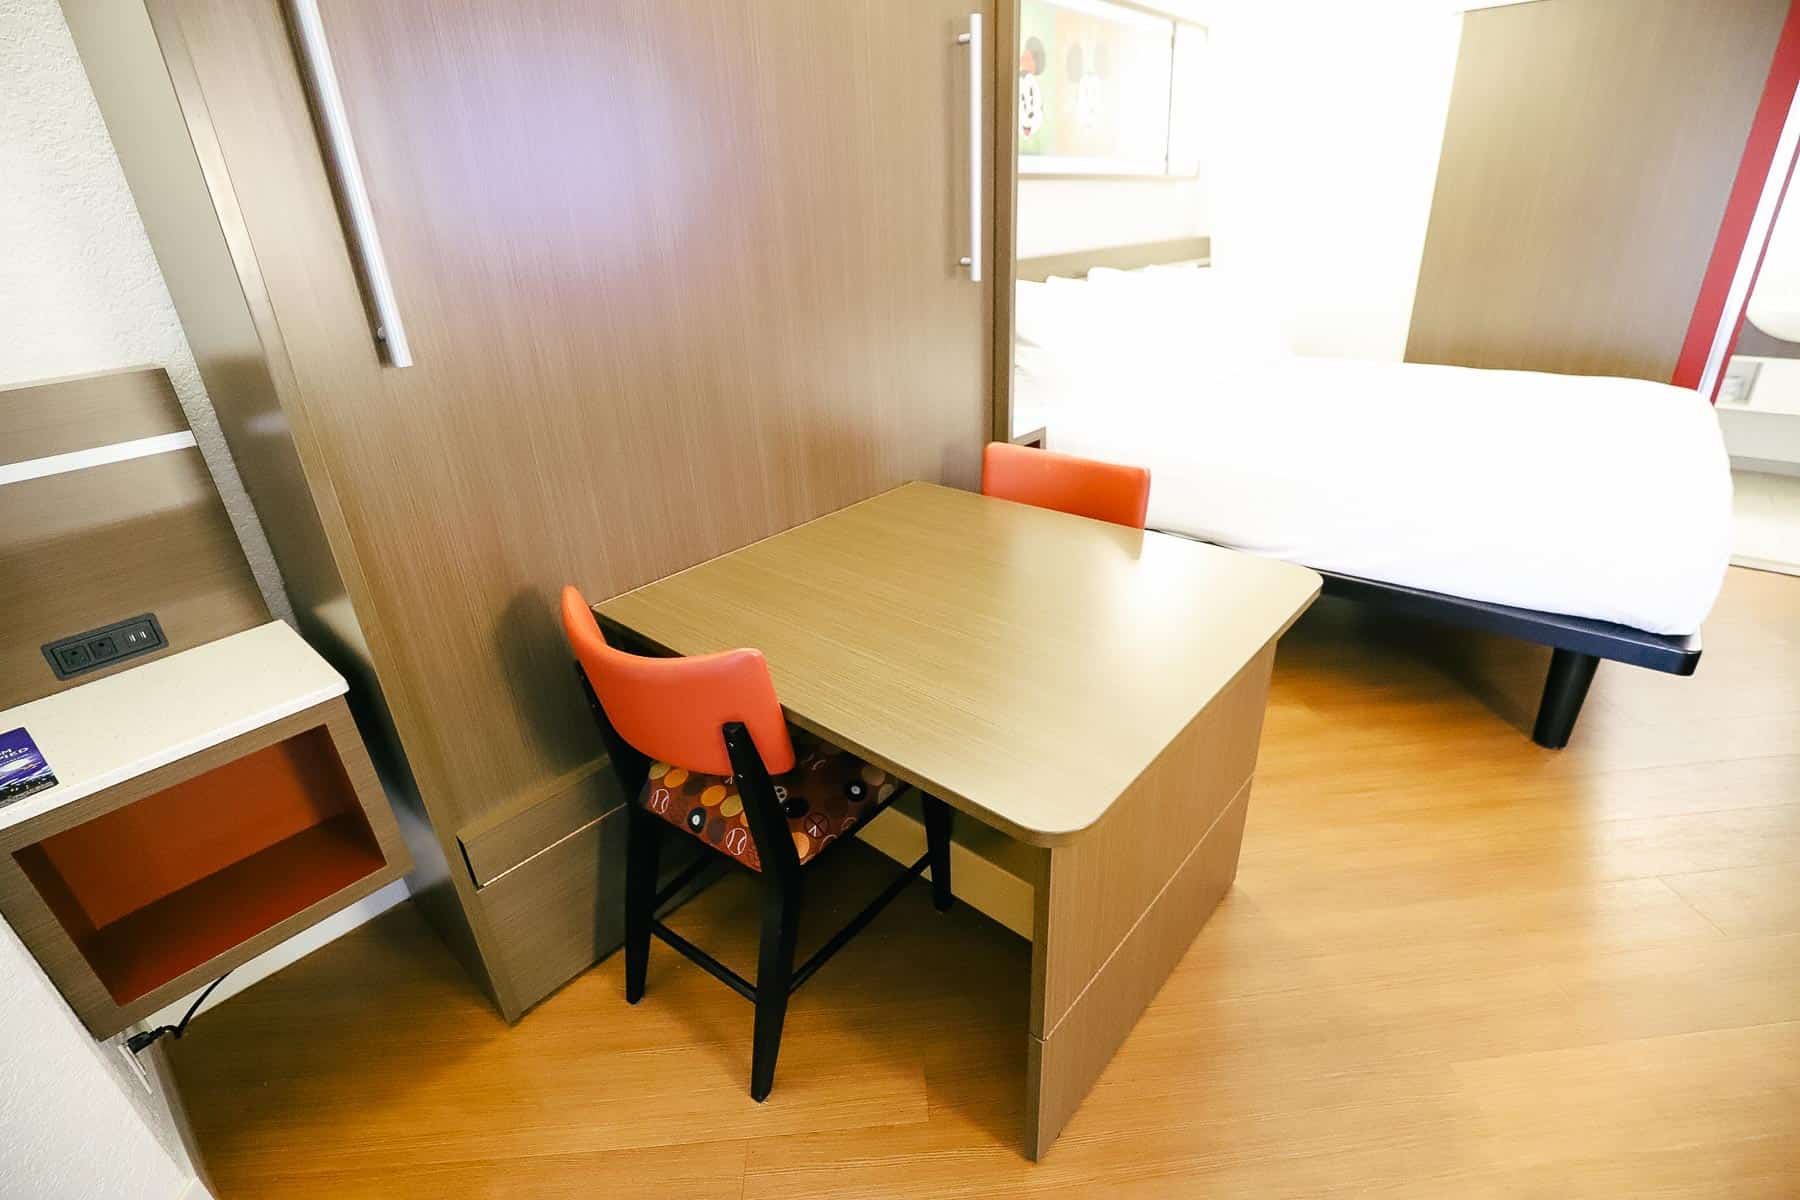 This table and chairs collapses to reveal a queen size bed.